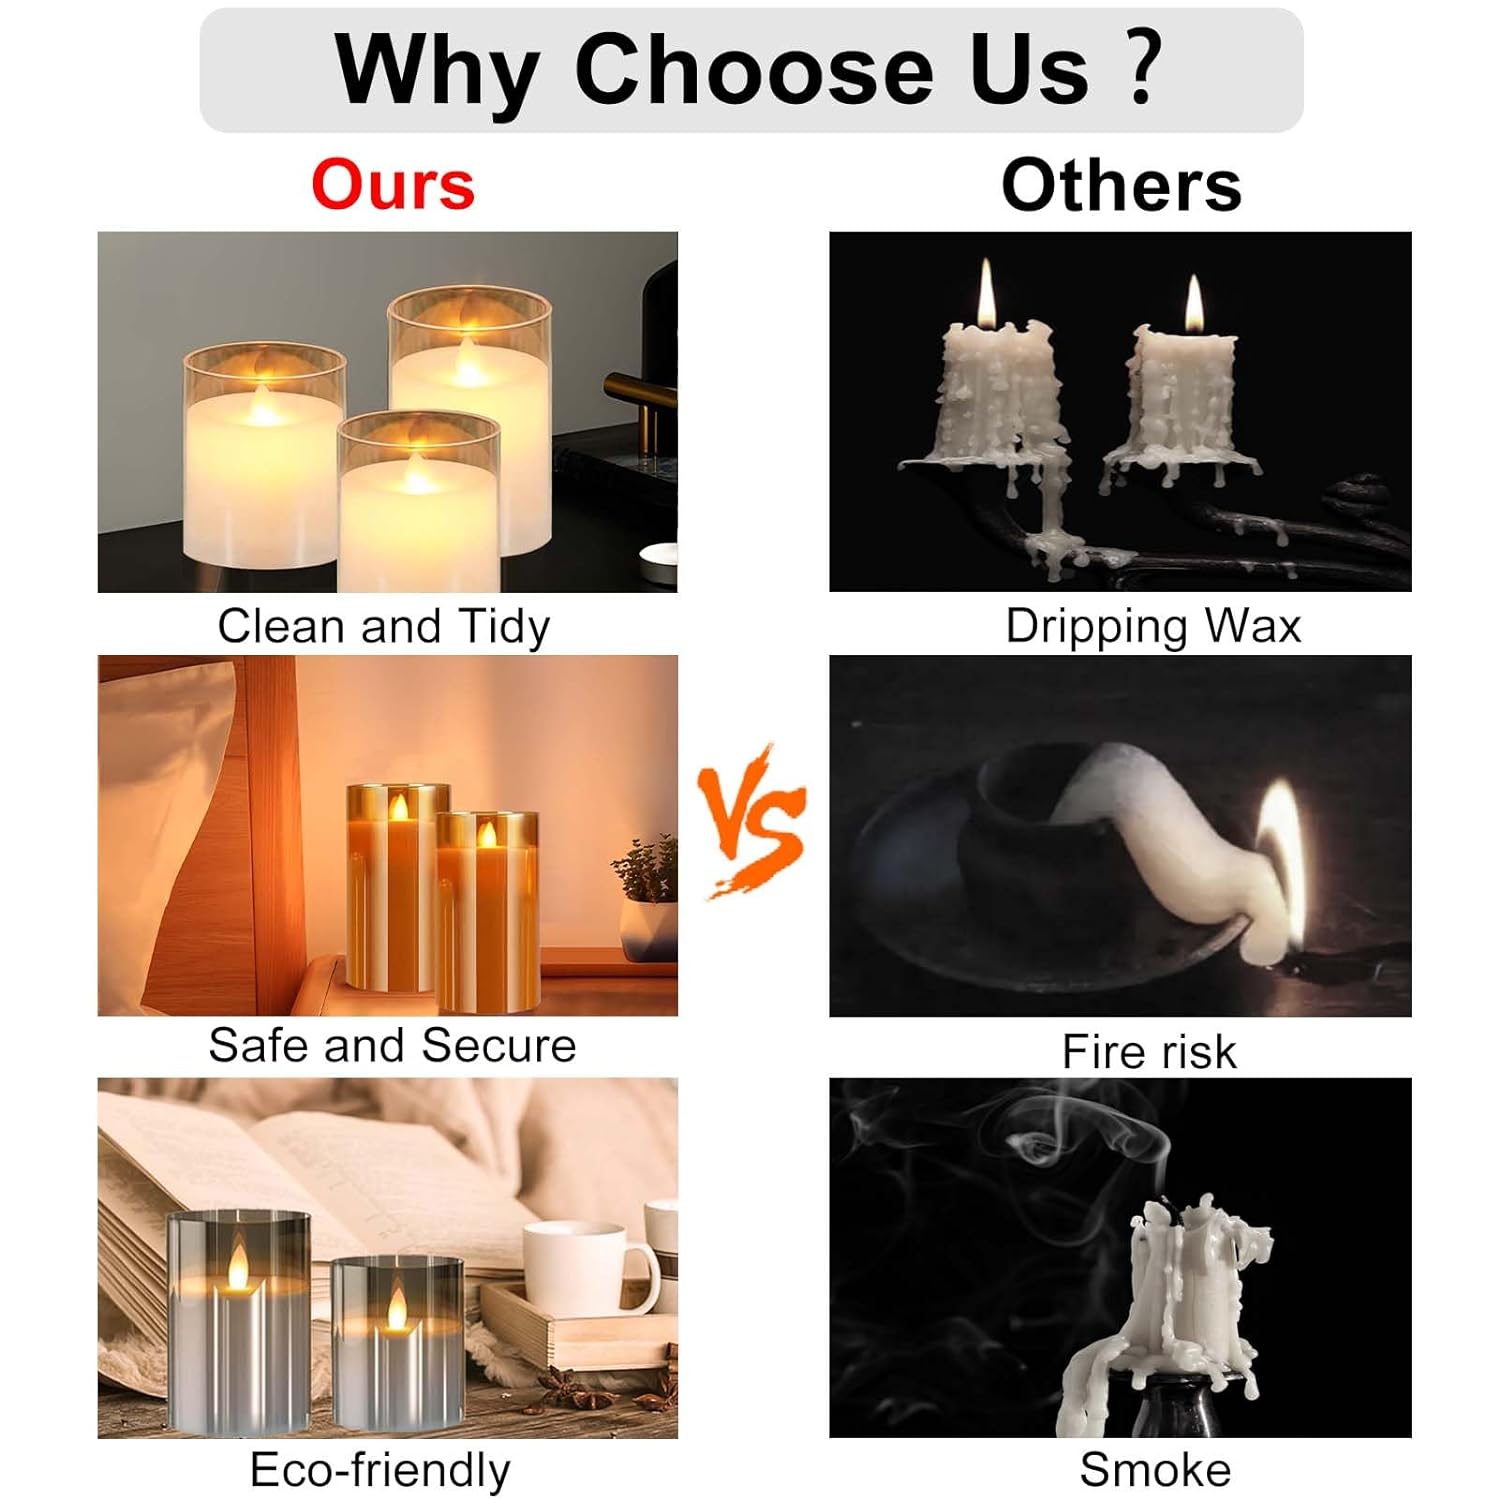 Sudifor Pure White Candle Lights, Plexiglass Flickering Flameless Candles with 2 Remote and Timer, 5 (D 3"×H 4" 4" 5" 5" 6") Pack Large Pillar Candles Battery Operated for Home and Holiday Decoration